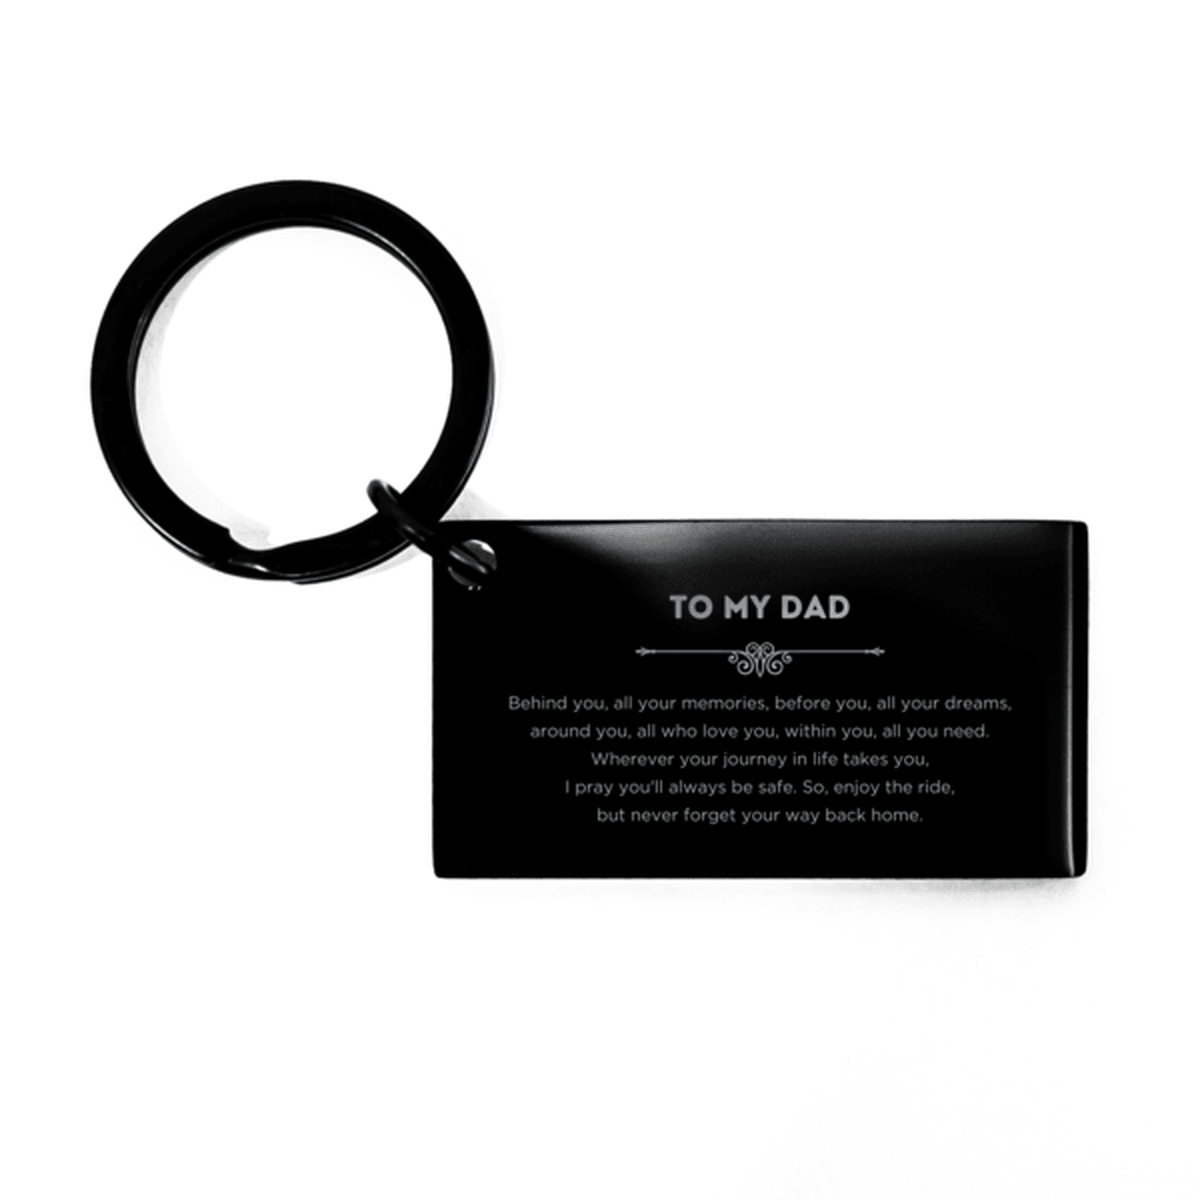 Dad Keychain Birthday Christmas Unique Gifts Behind you, all your memories, before you, all your dreams - Mallard Moon Gift Shop